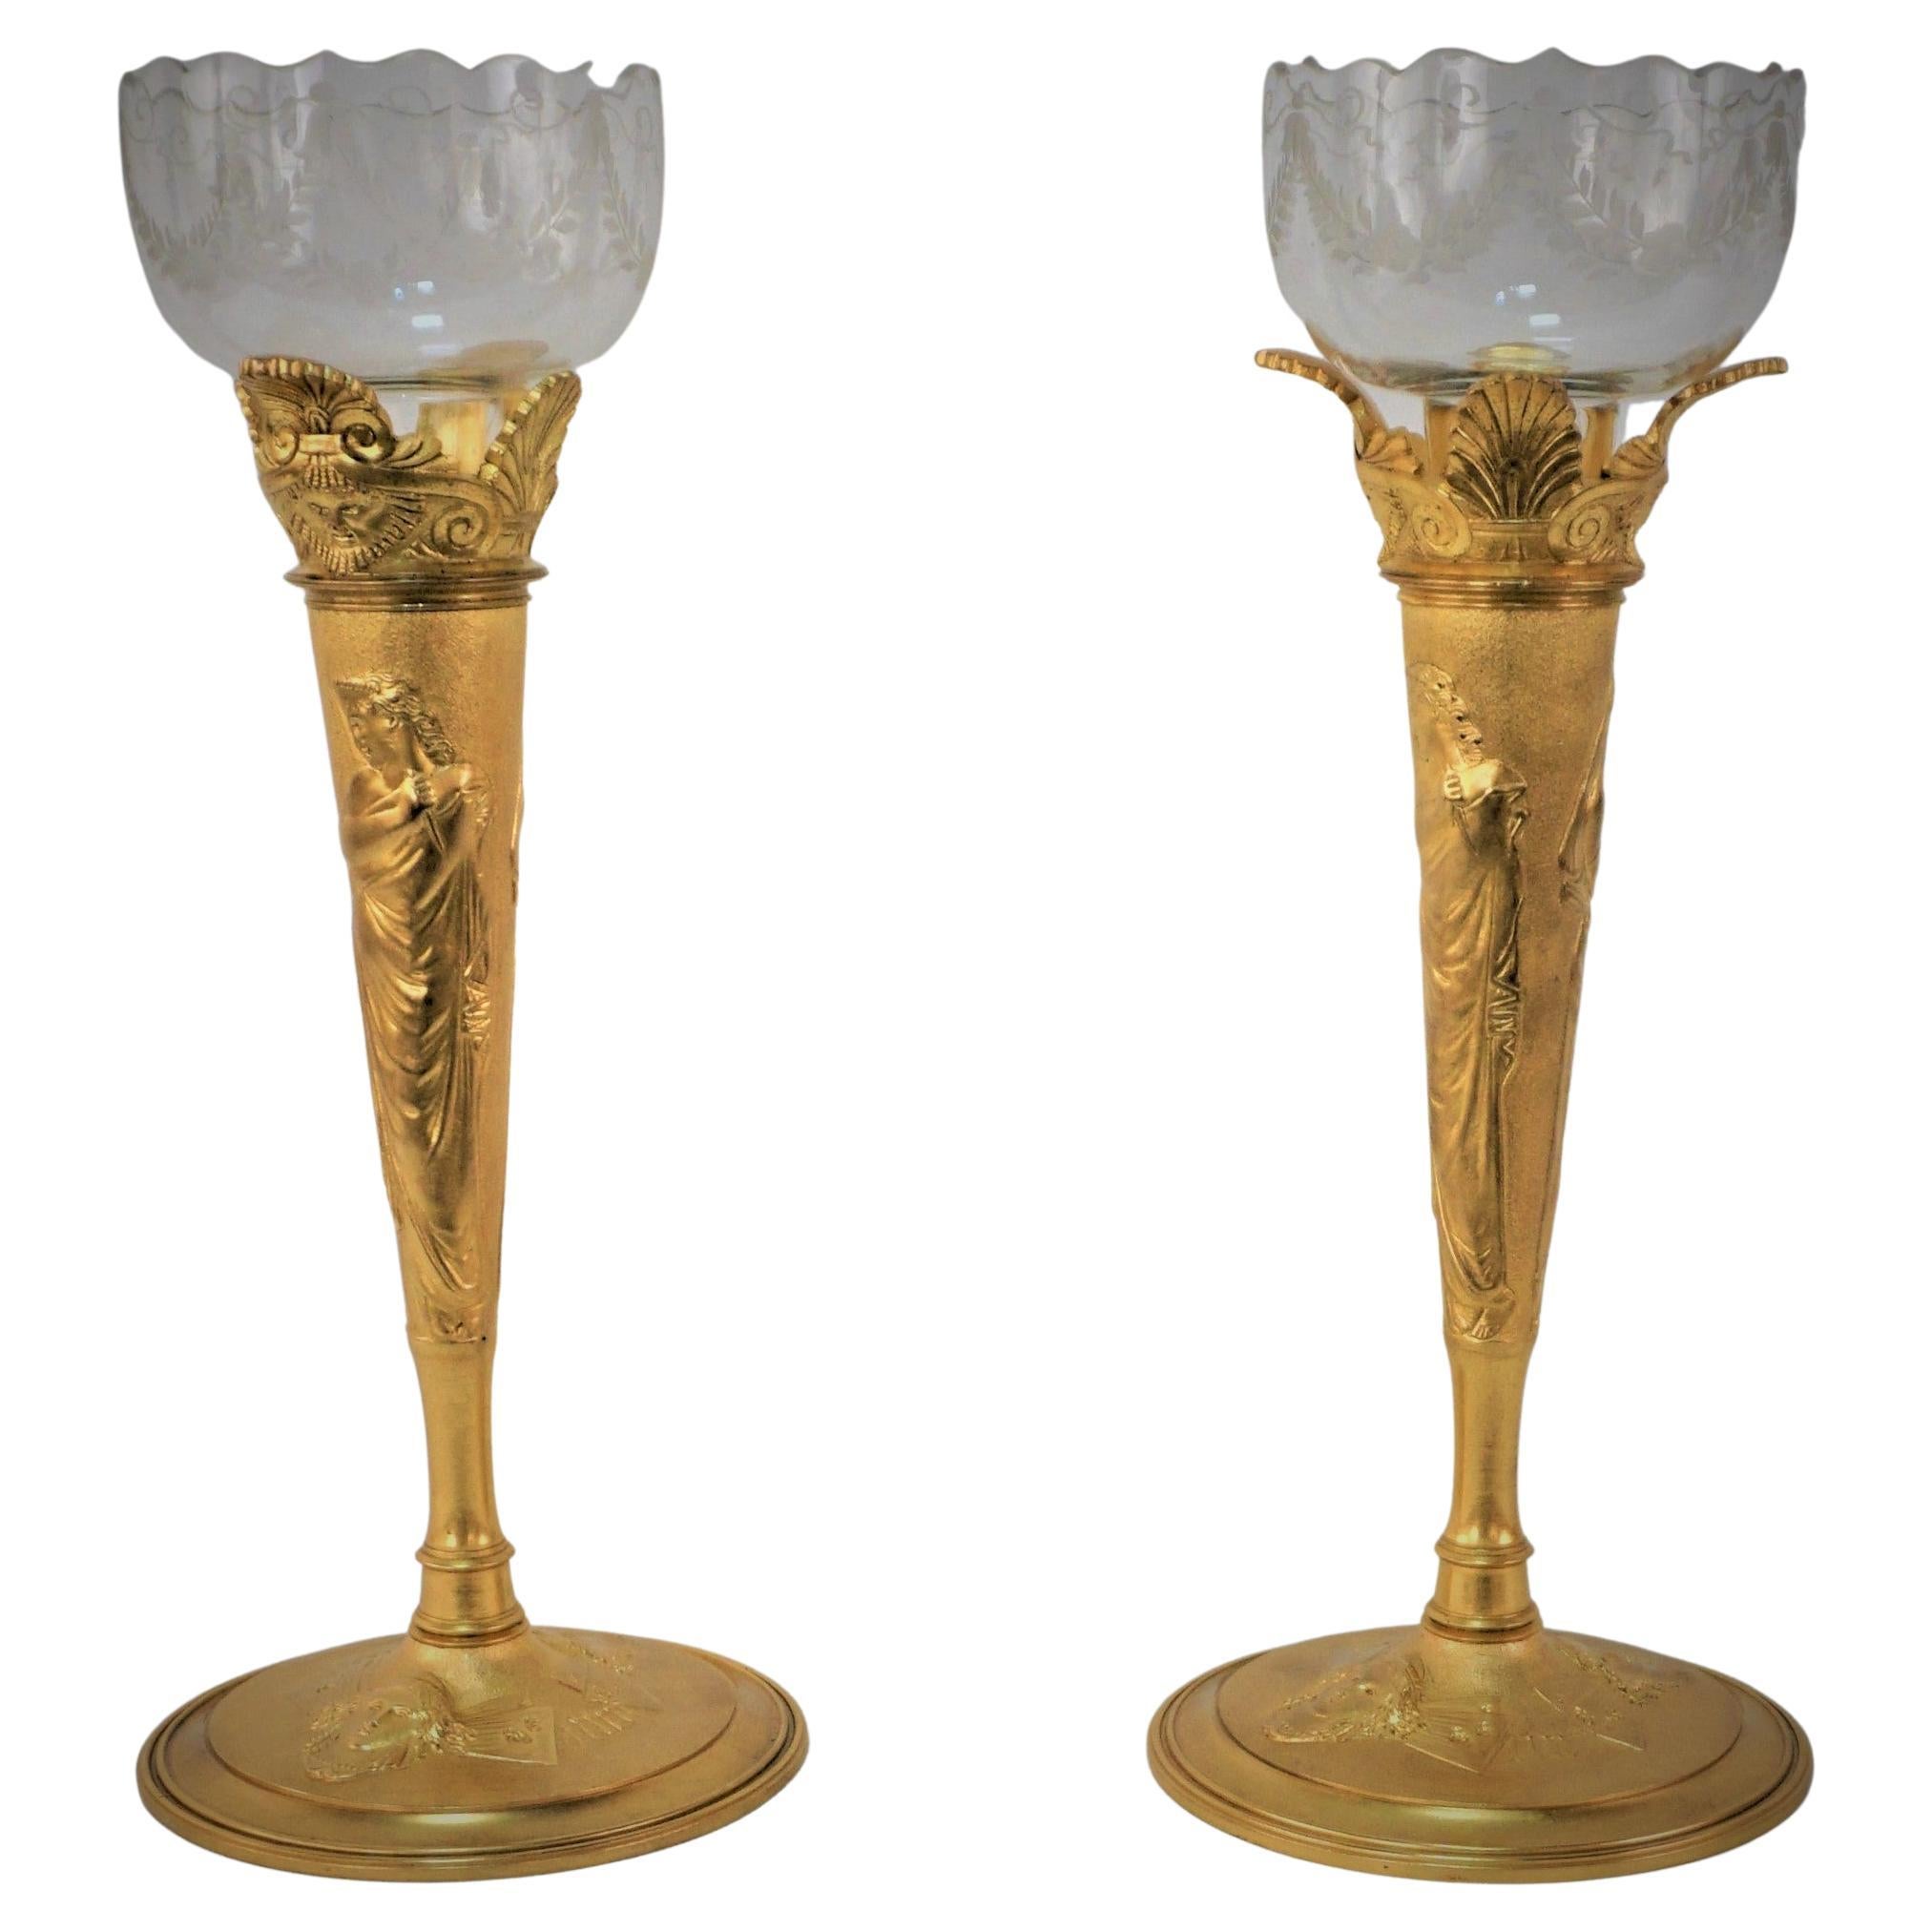 Pair of Neoclassical Gilt Bronze Etched Glass Candlesticks / Vases